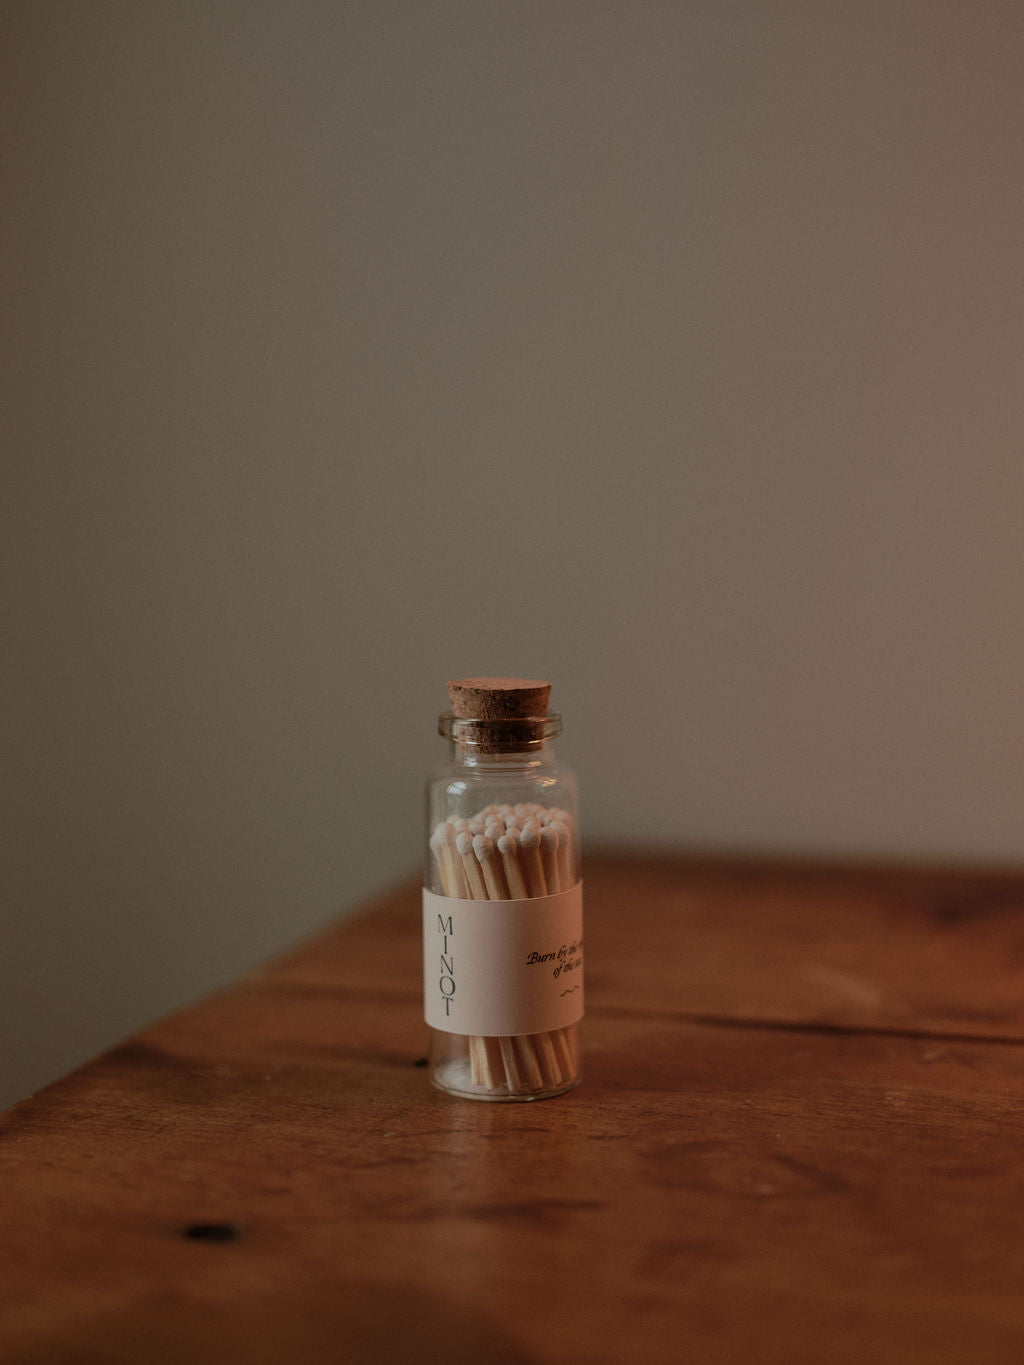 Close up of a small, corked glass bottle containing safety matches with white tips